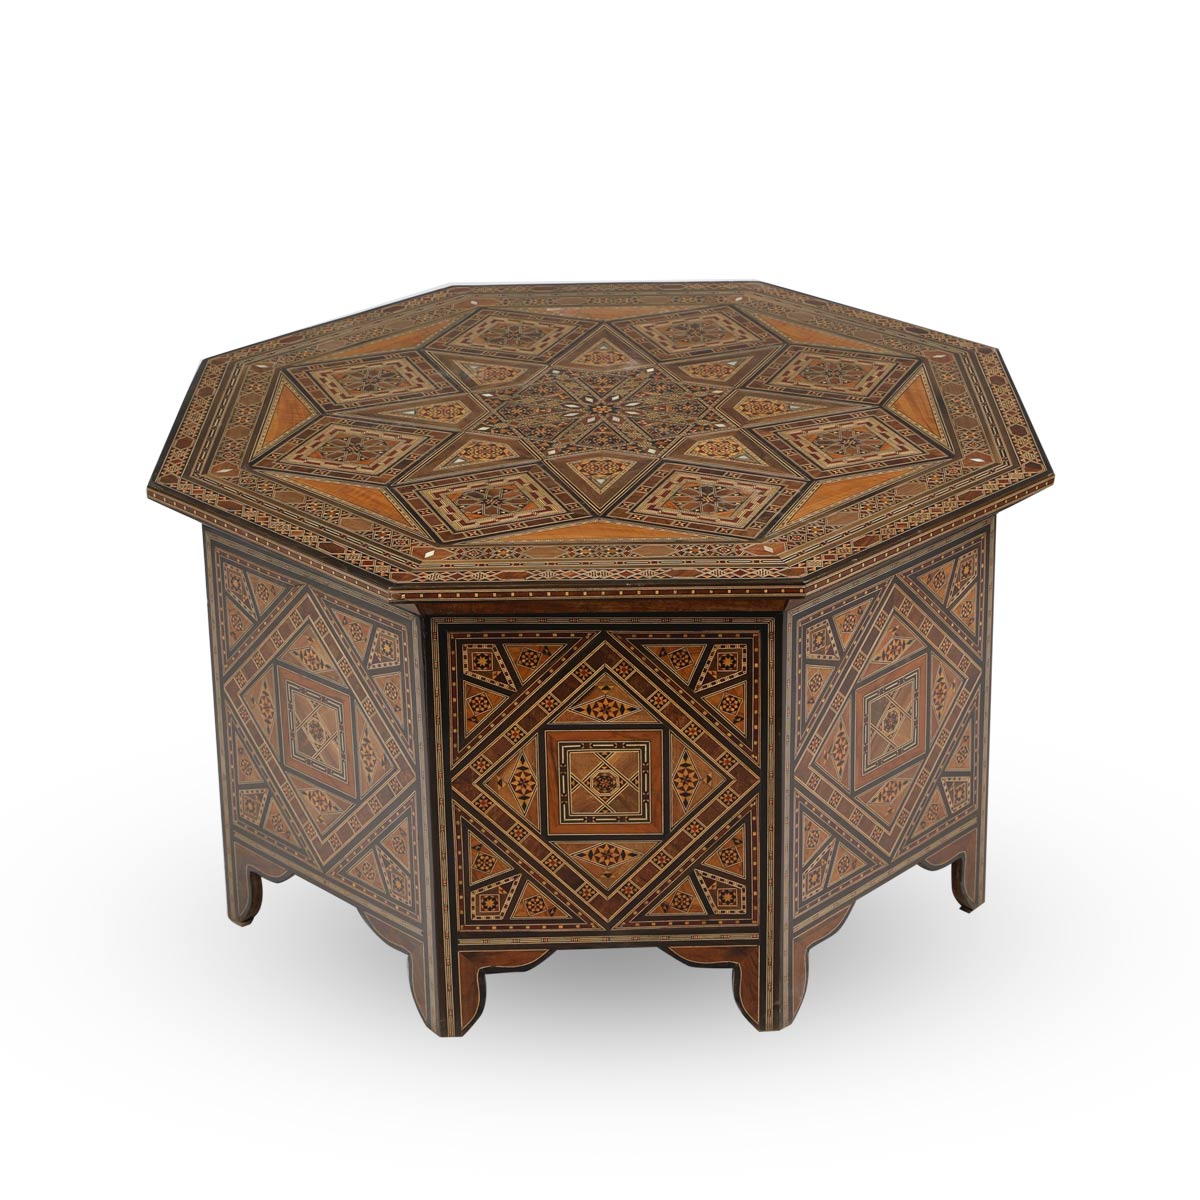 Angled Top View of Octagonal Syrian Mosaic Wood Table